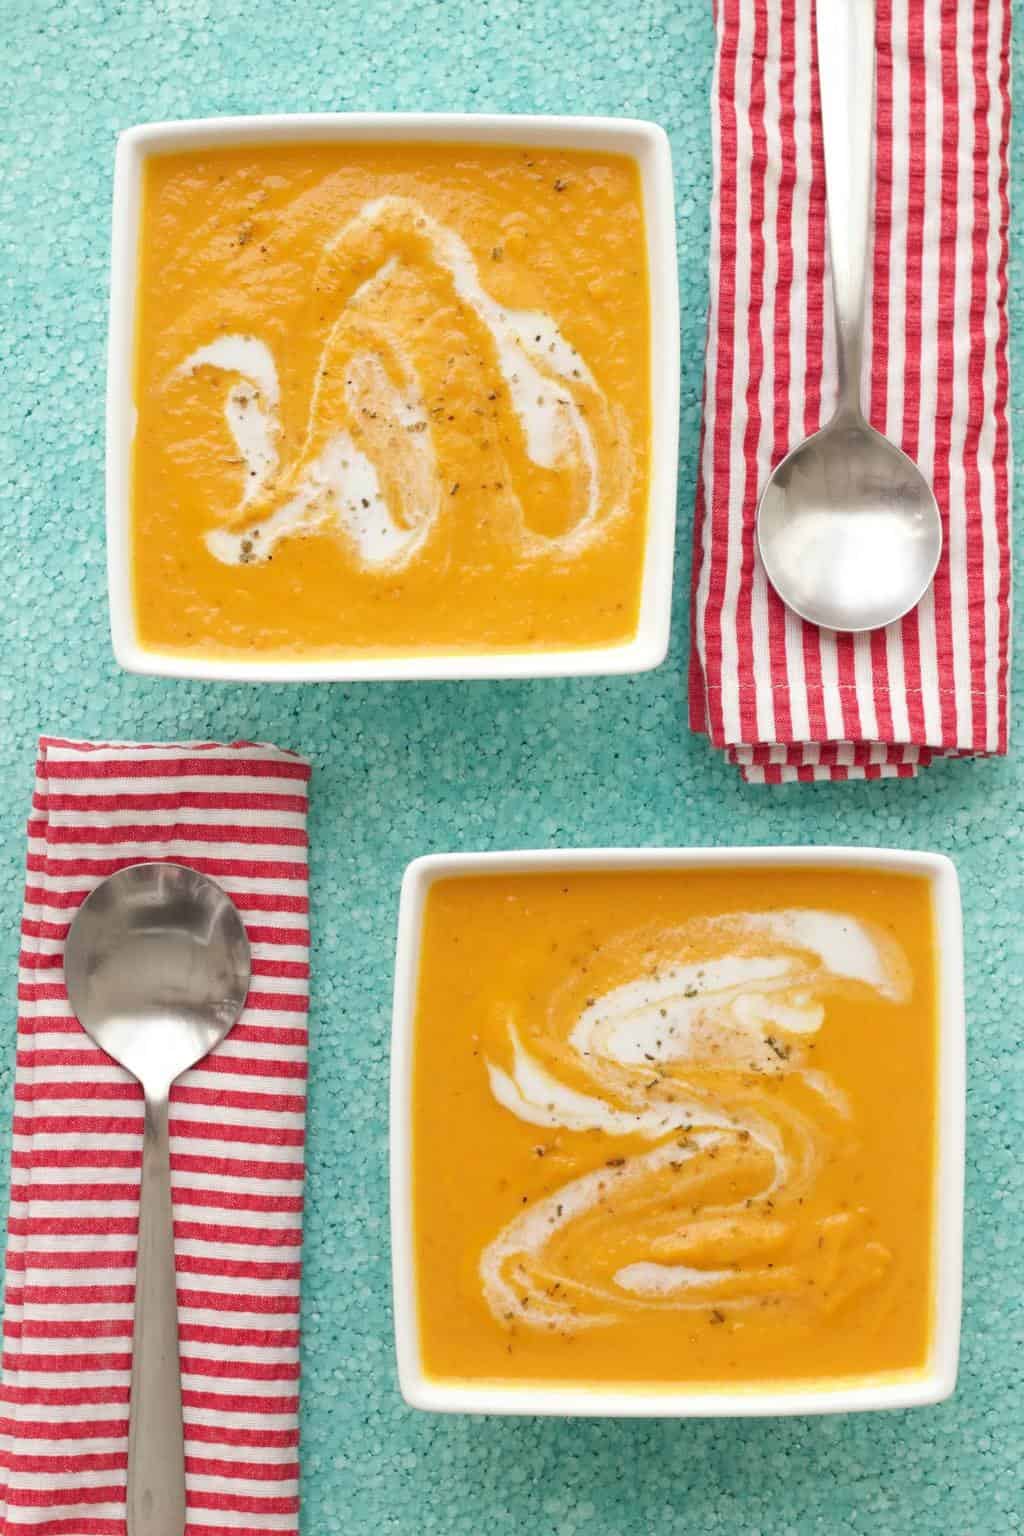 Spicy Thai Carrot And Sweet Potato Soup